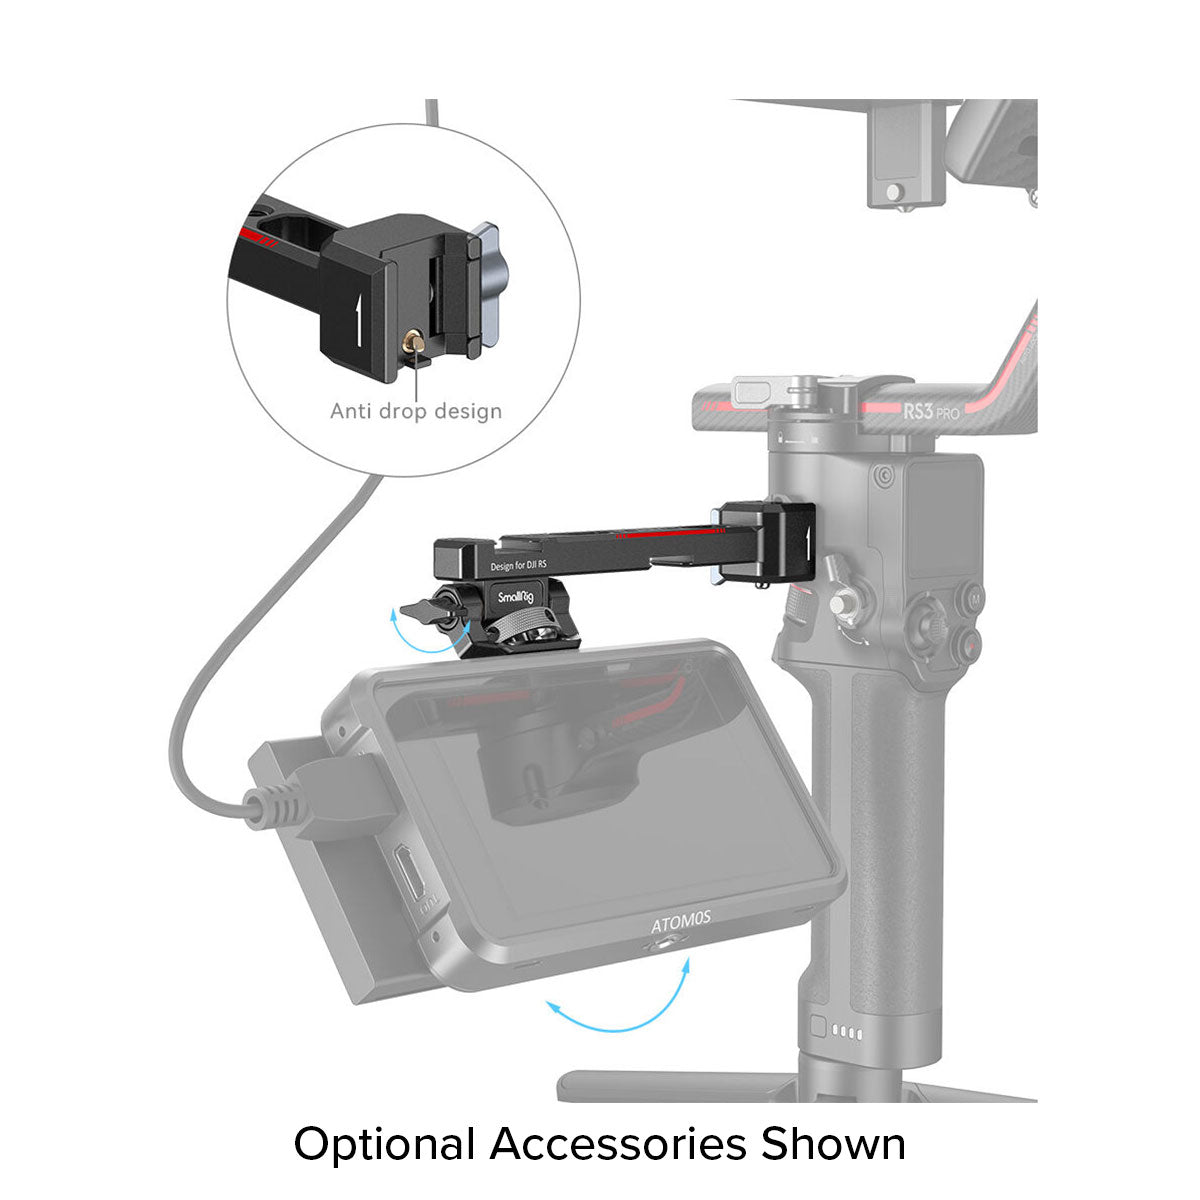 SmallRig Monitor Mounting Support with NATO Clamp for DJI RS Gimbals